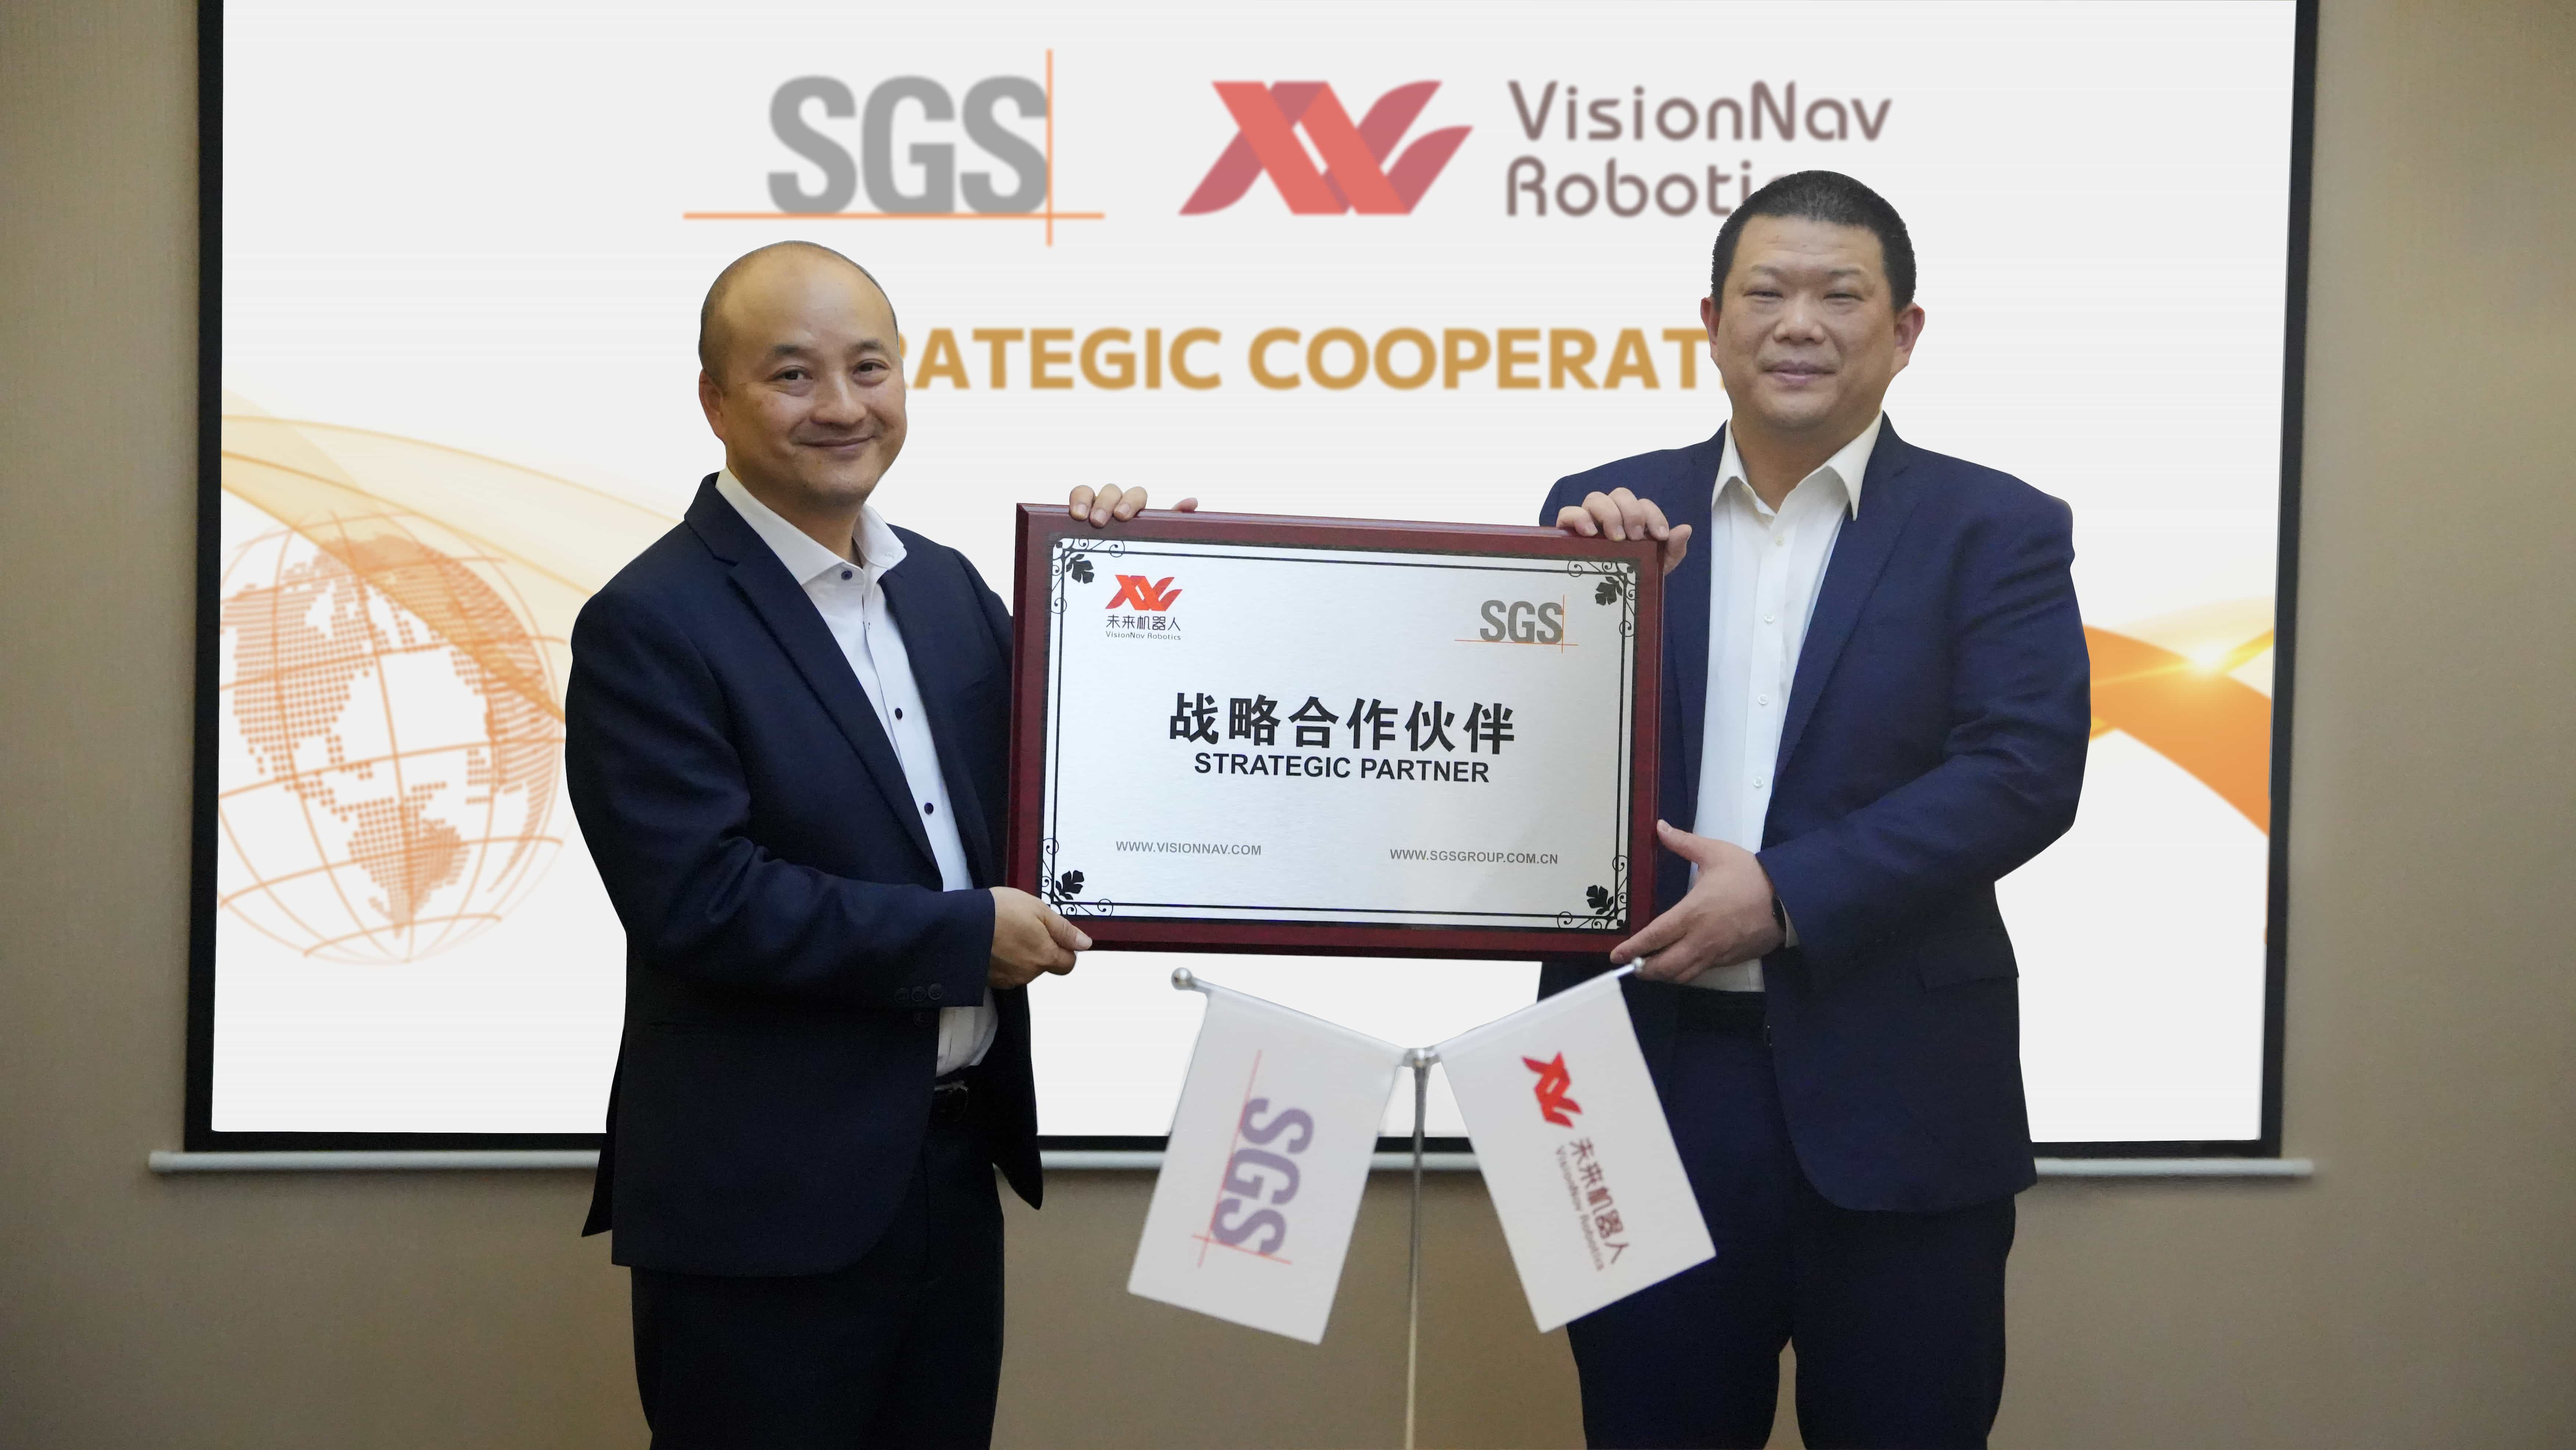 VisionNav Robotics Join Hands with SGS to Motivate Logistics Automation